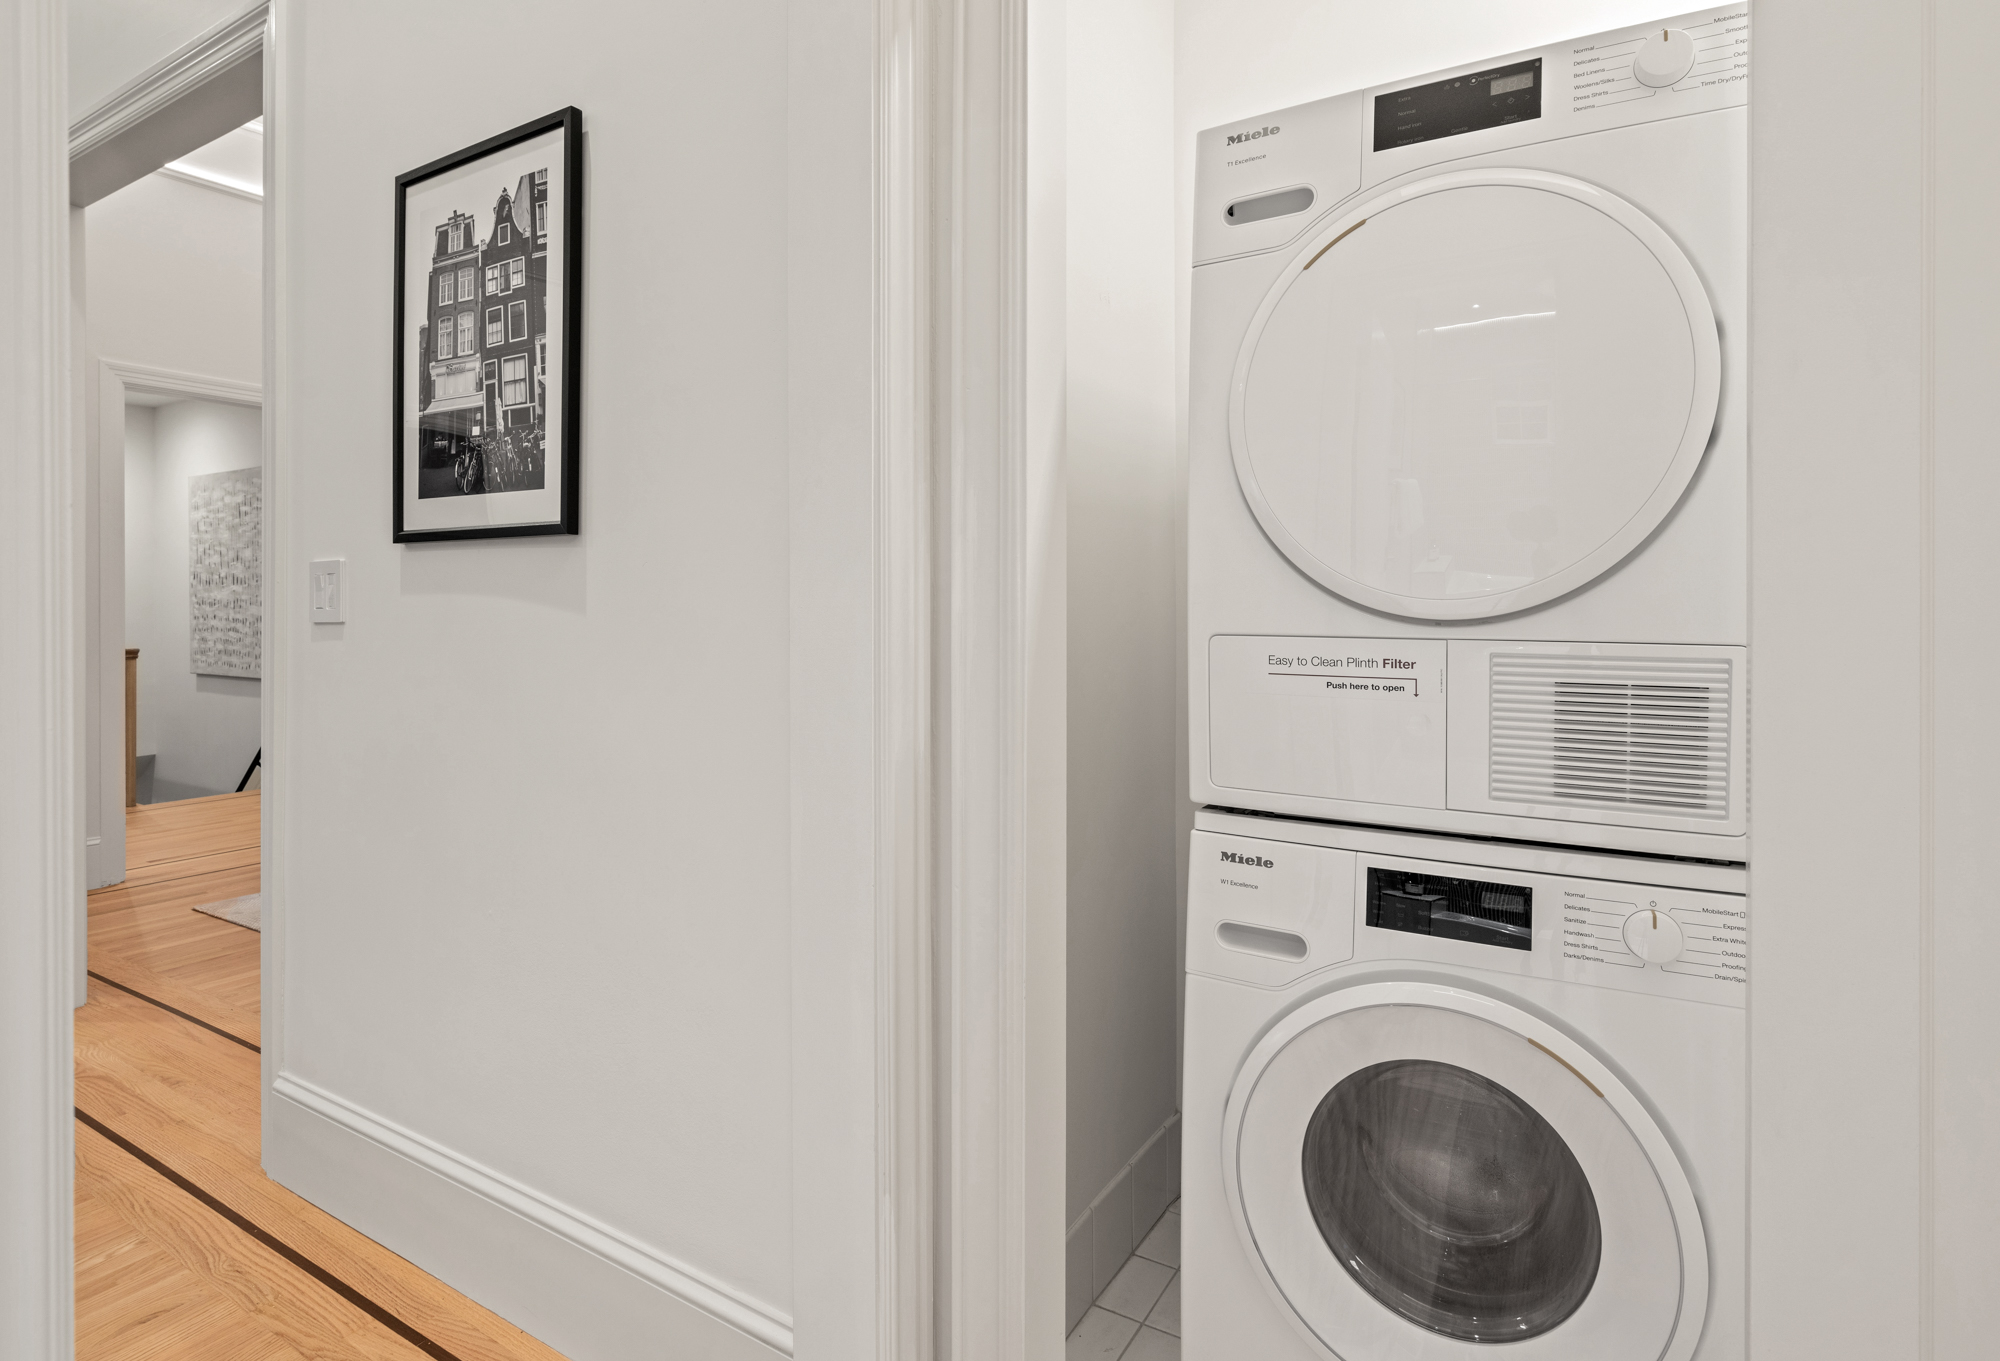 The new Miele laundry machines